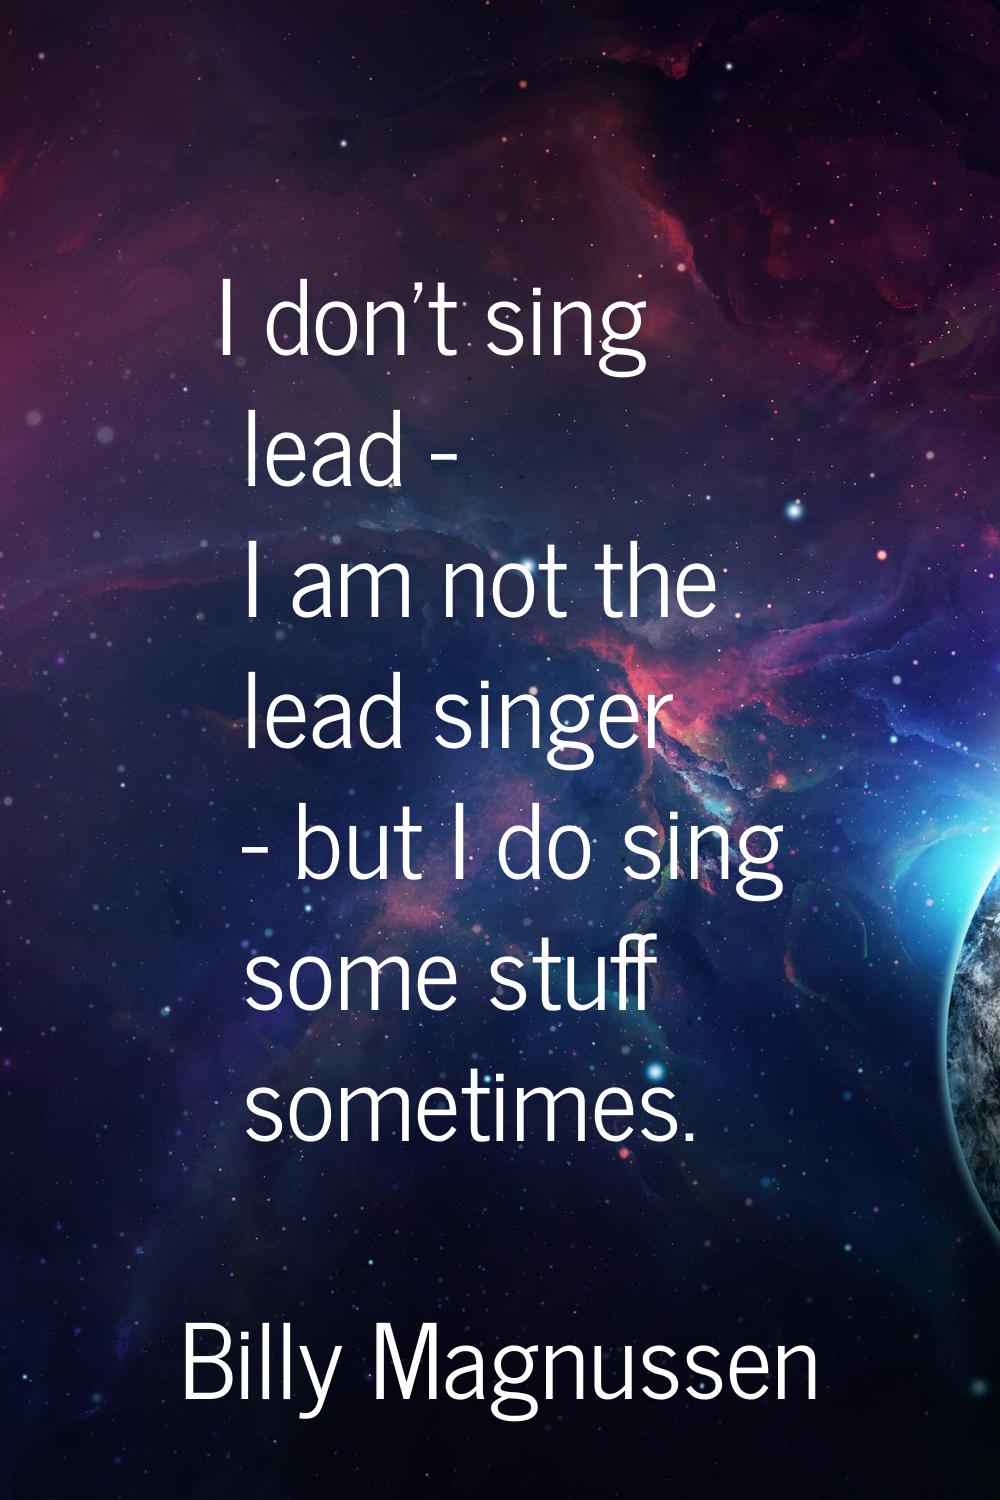 I don't sing lead - I am not the lead singer - but I do sing some stuff sometimes.